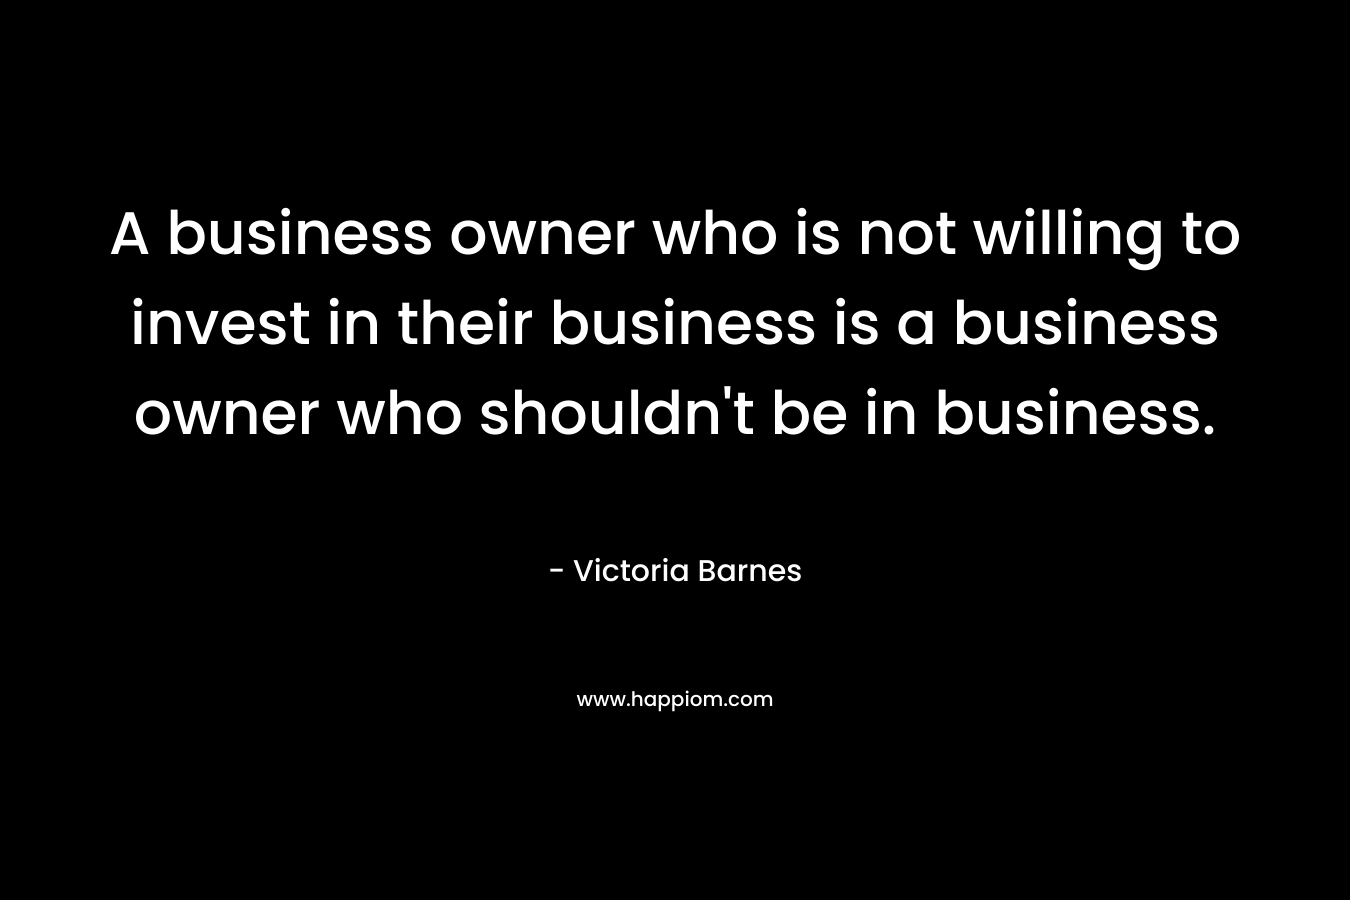 A business owner who is not willing to invest in their business is a business owner who shouldn’t be in business. – Victoria Barnes